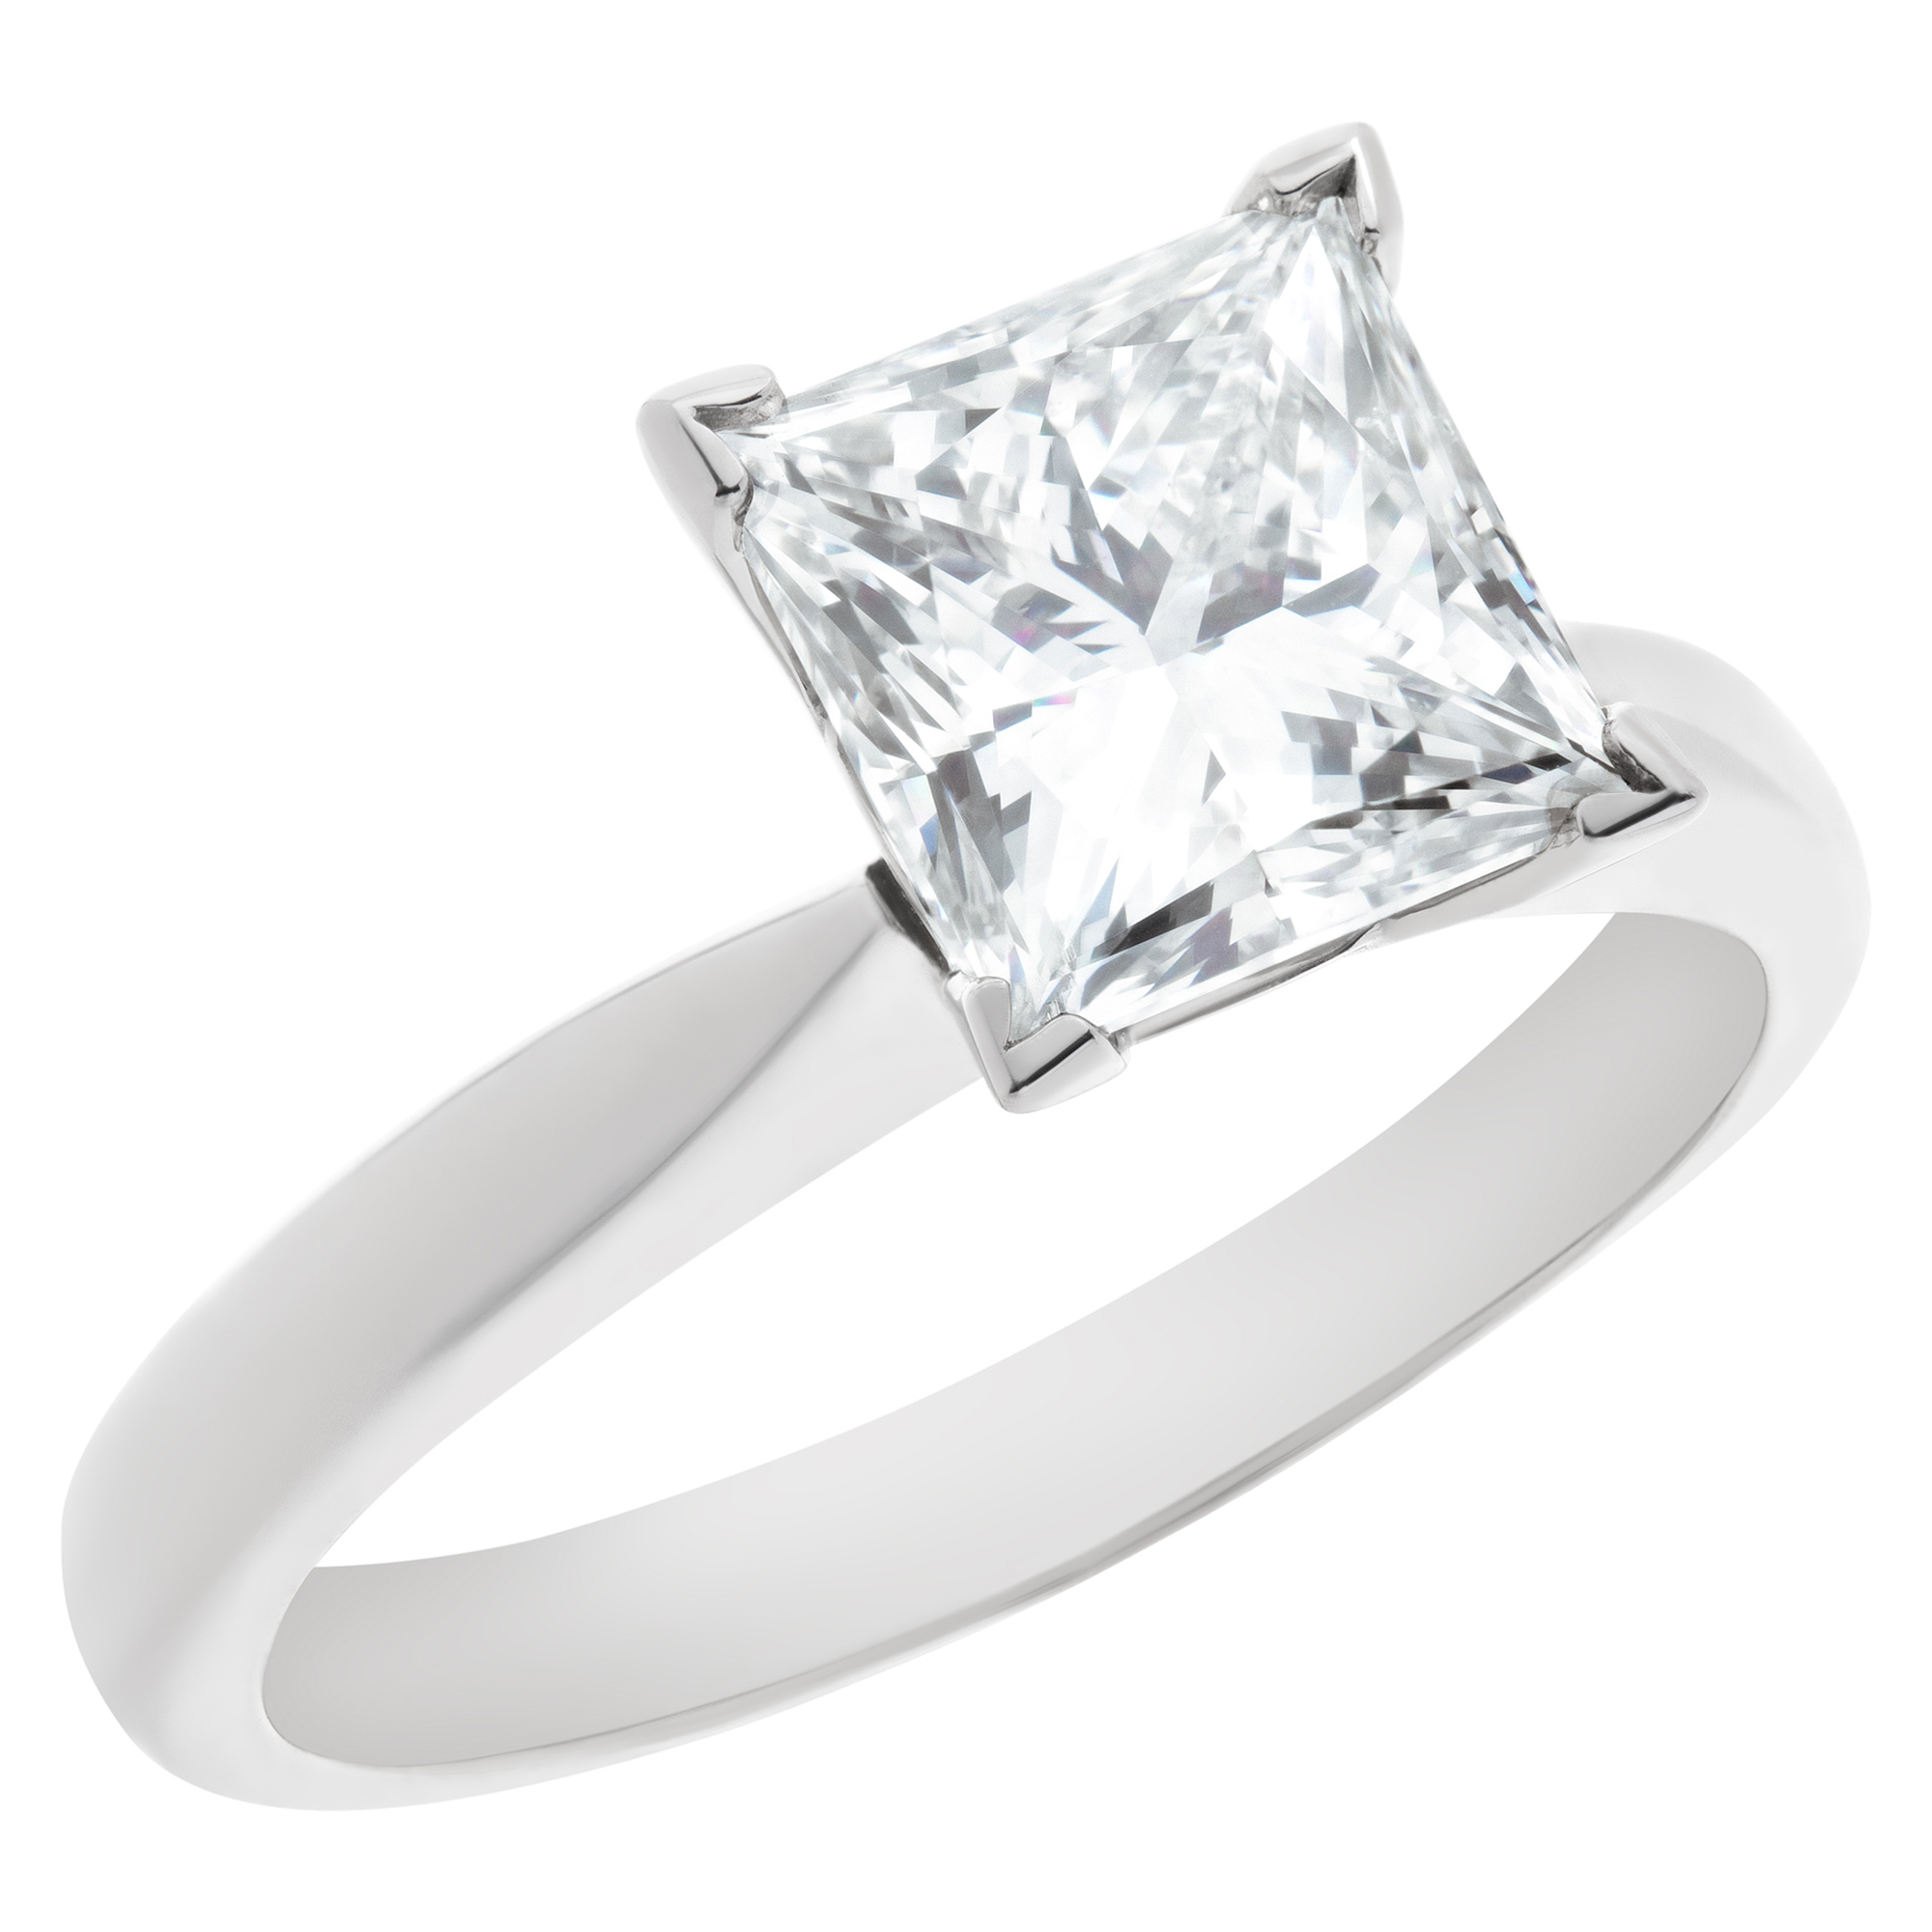 GIA certified princess cut diamond 2.09 carat (J color, SI1 clarity) solitaire ring image 3